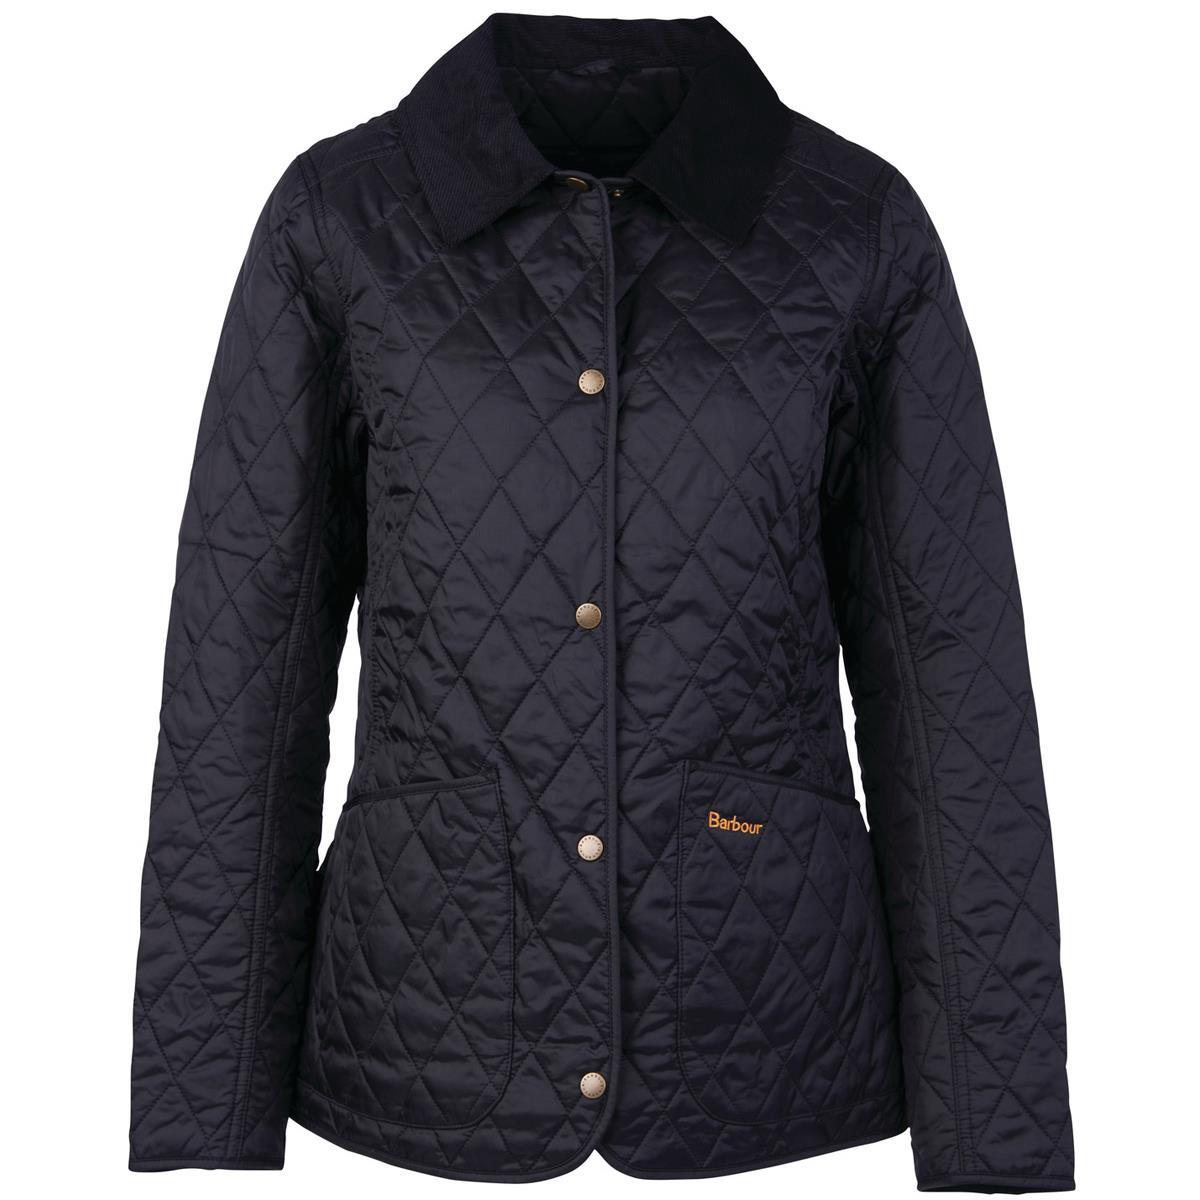 What is the proper way to clean the Barbour Annandale Quilted Jacket?